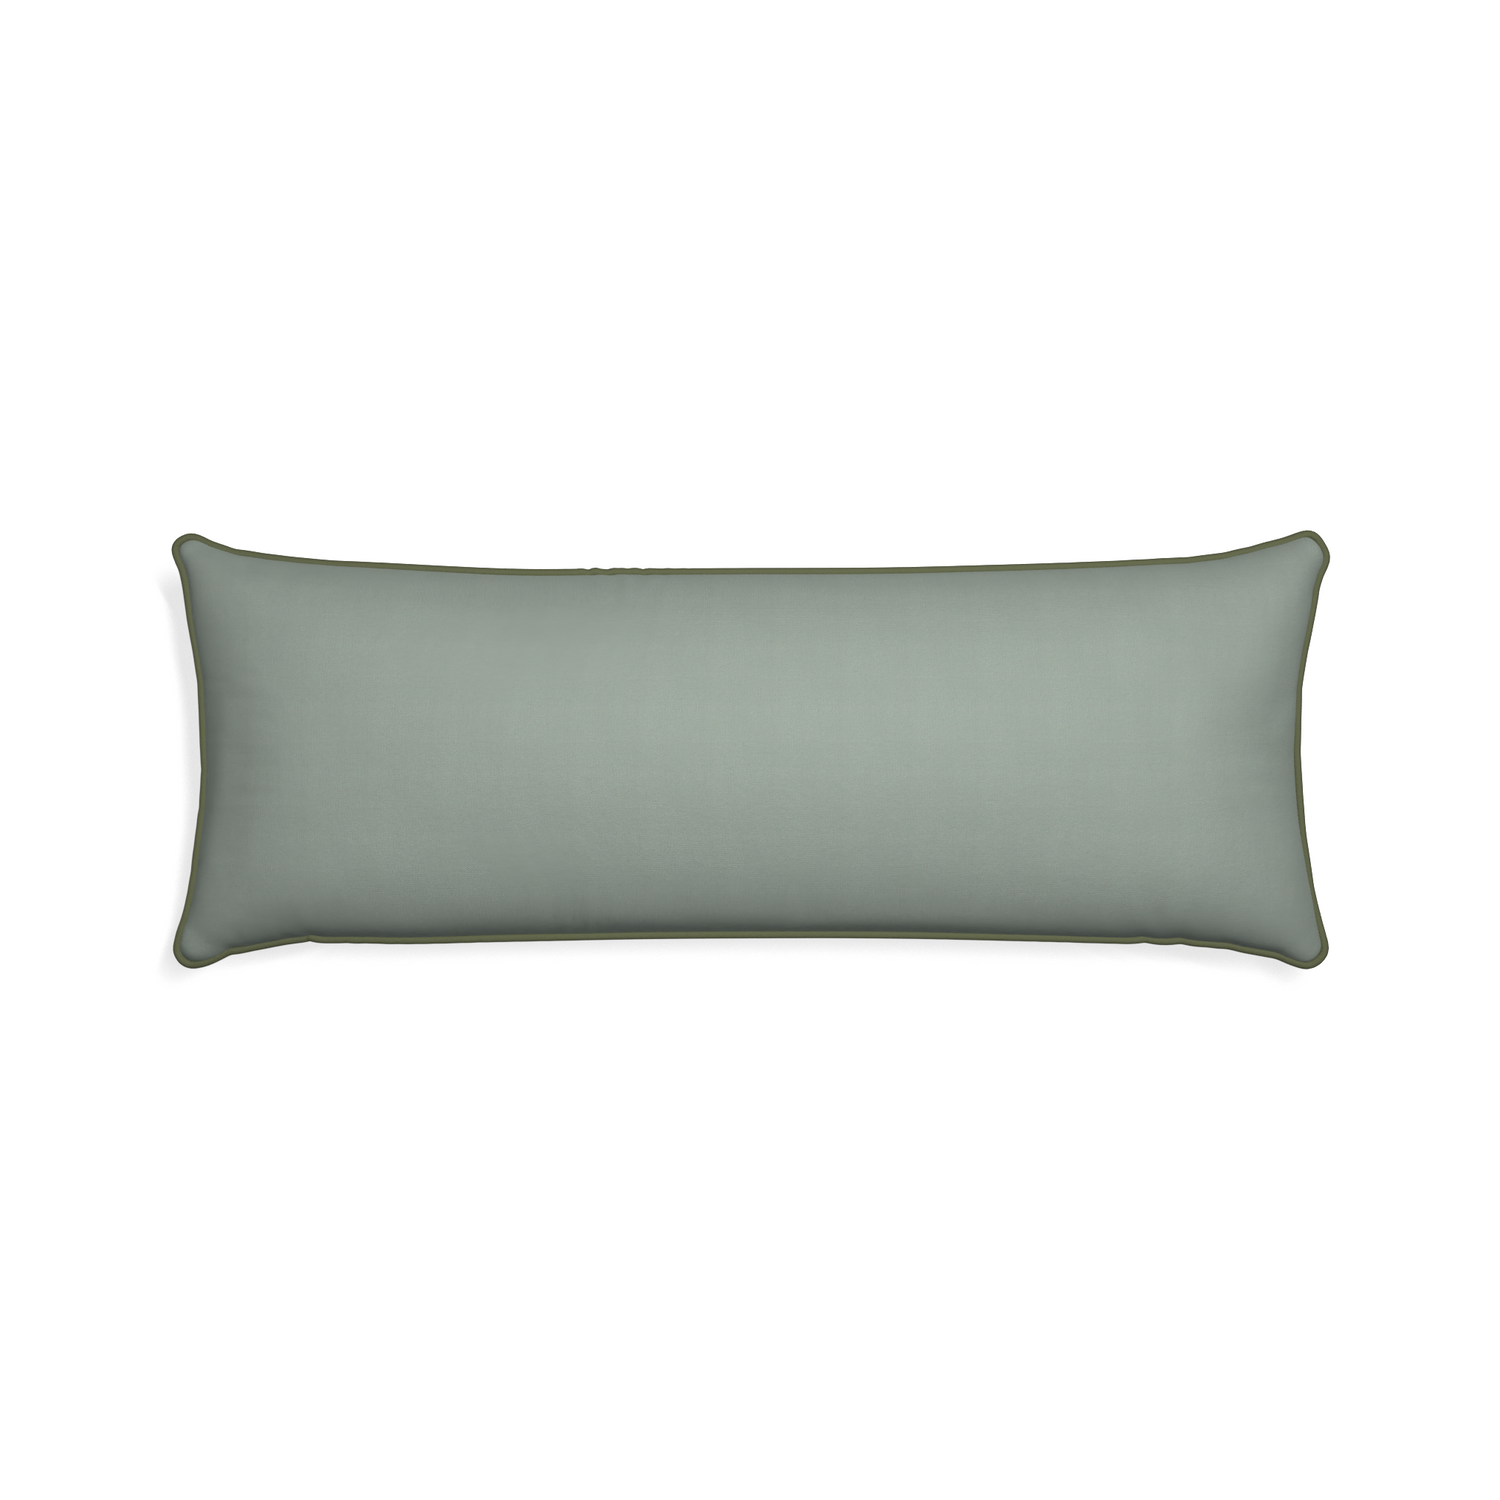 Xl-lumbar sage custom sage green cottonpillow with f piping on white background